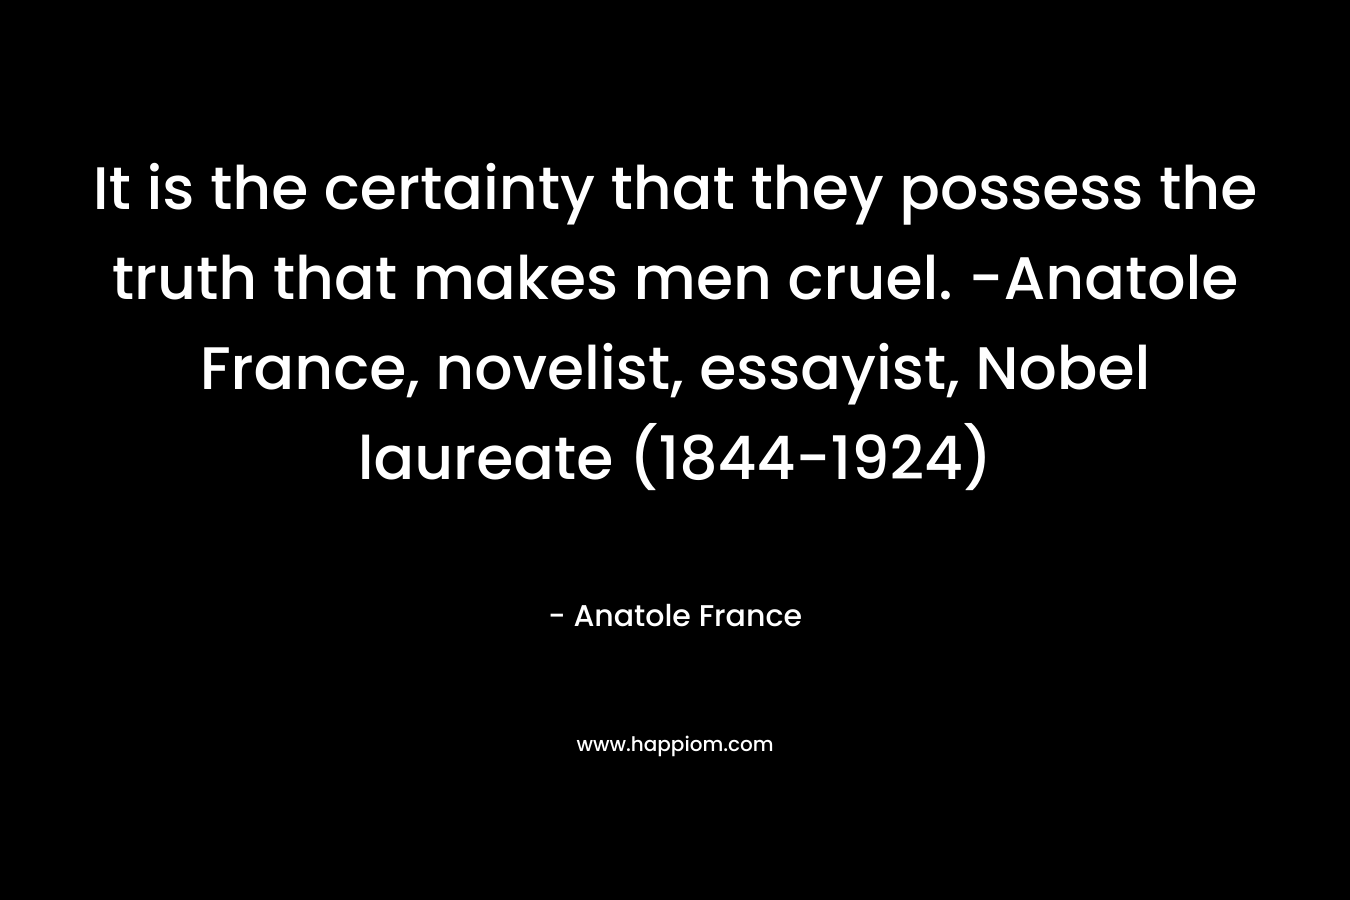 It is the certainty that they possess the truth that makes men cruel. -Anatole France, novelist, essayist, Nobel laureate (1844-1924)